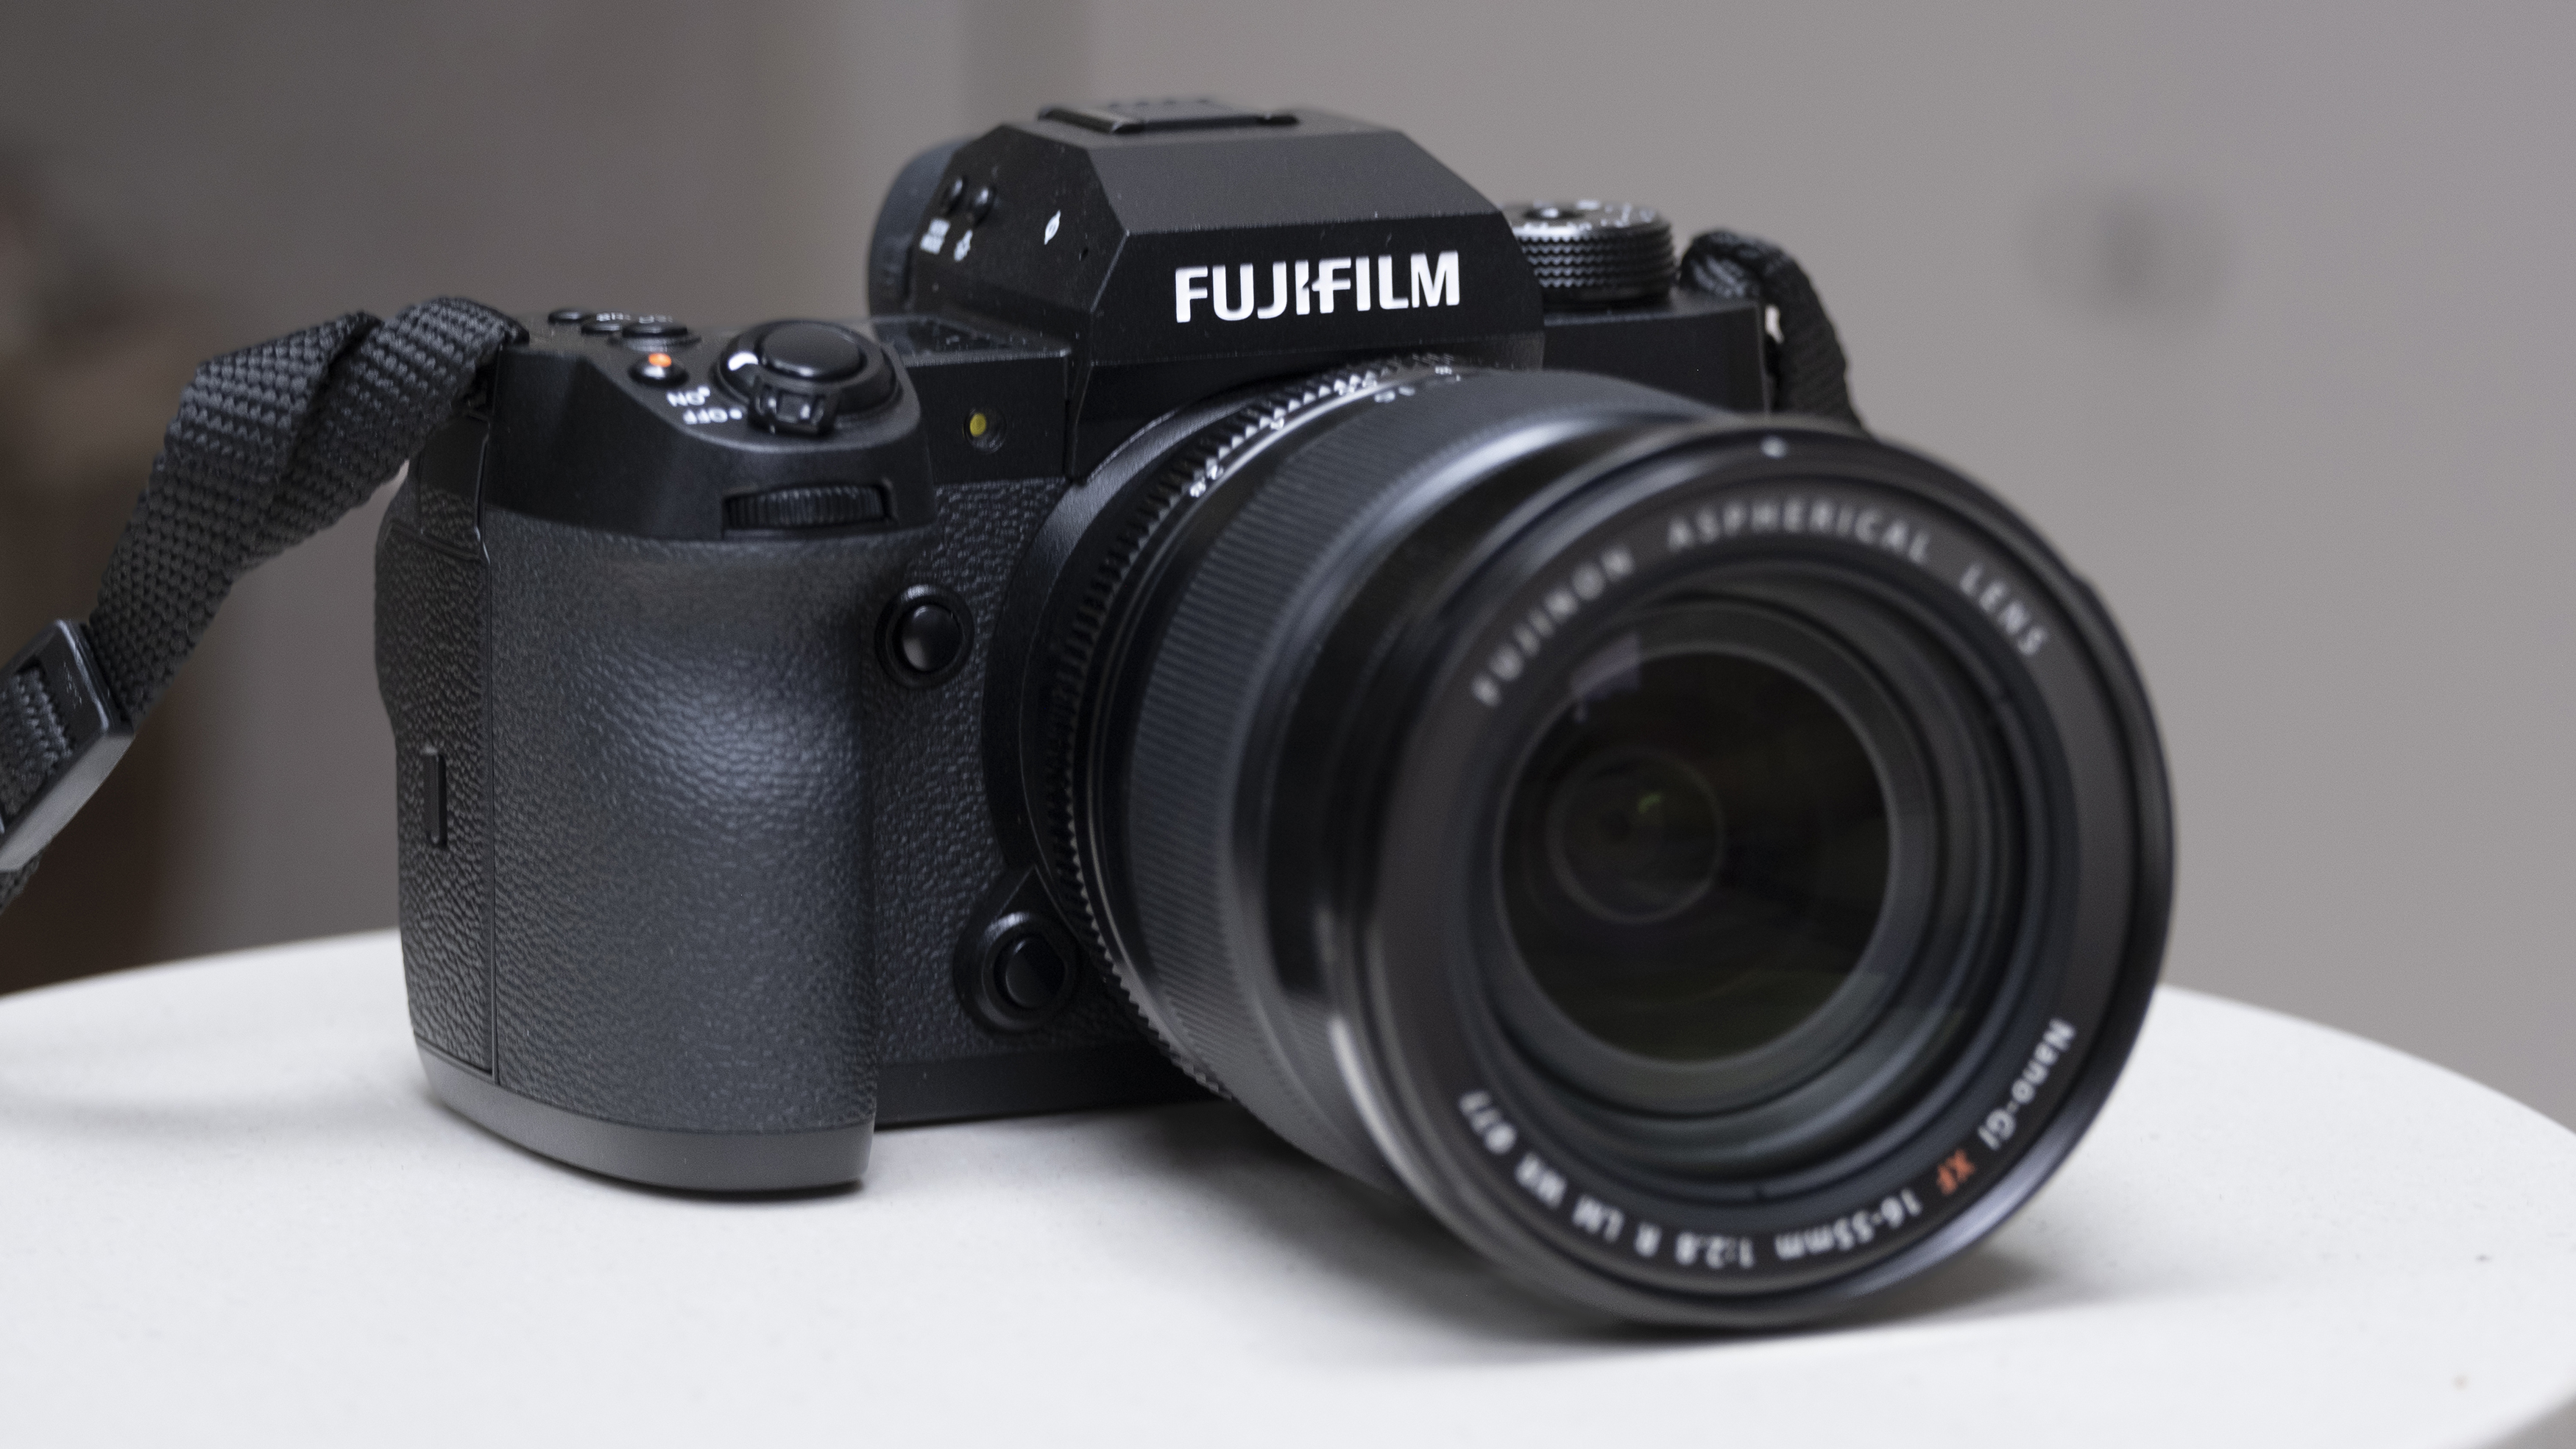 The Fujifilm X-H2 camera setting on a white table